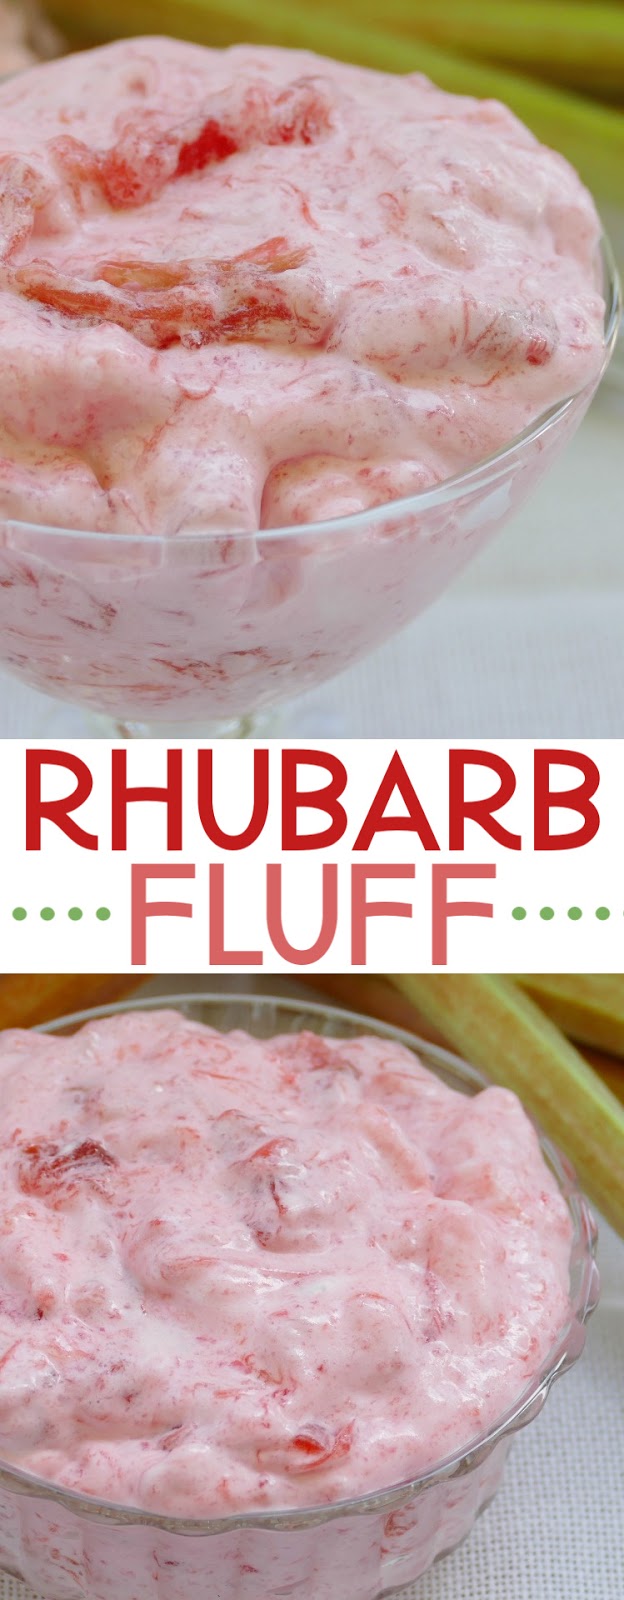 Looking for an easy and tasty spring or summer dessert? This wonderful Rhubarb Fluff Dessert Salad uses fresh or frozen rhubarb, any flavor red jello and a few other simple ingredients! It's such a crowd pleaser and perfect for any occasion!